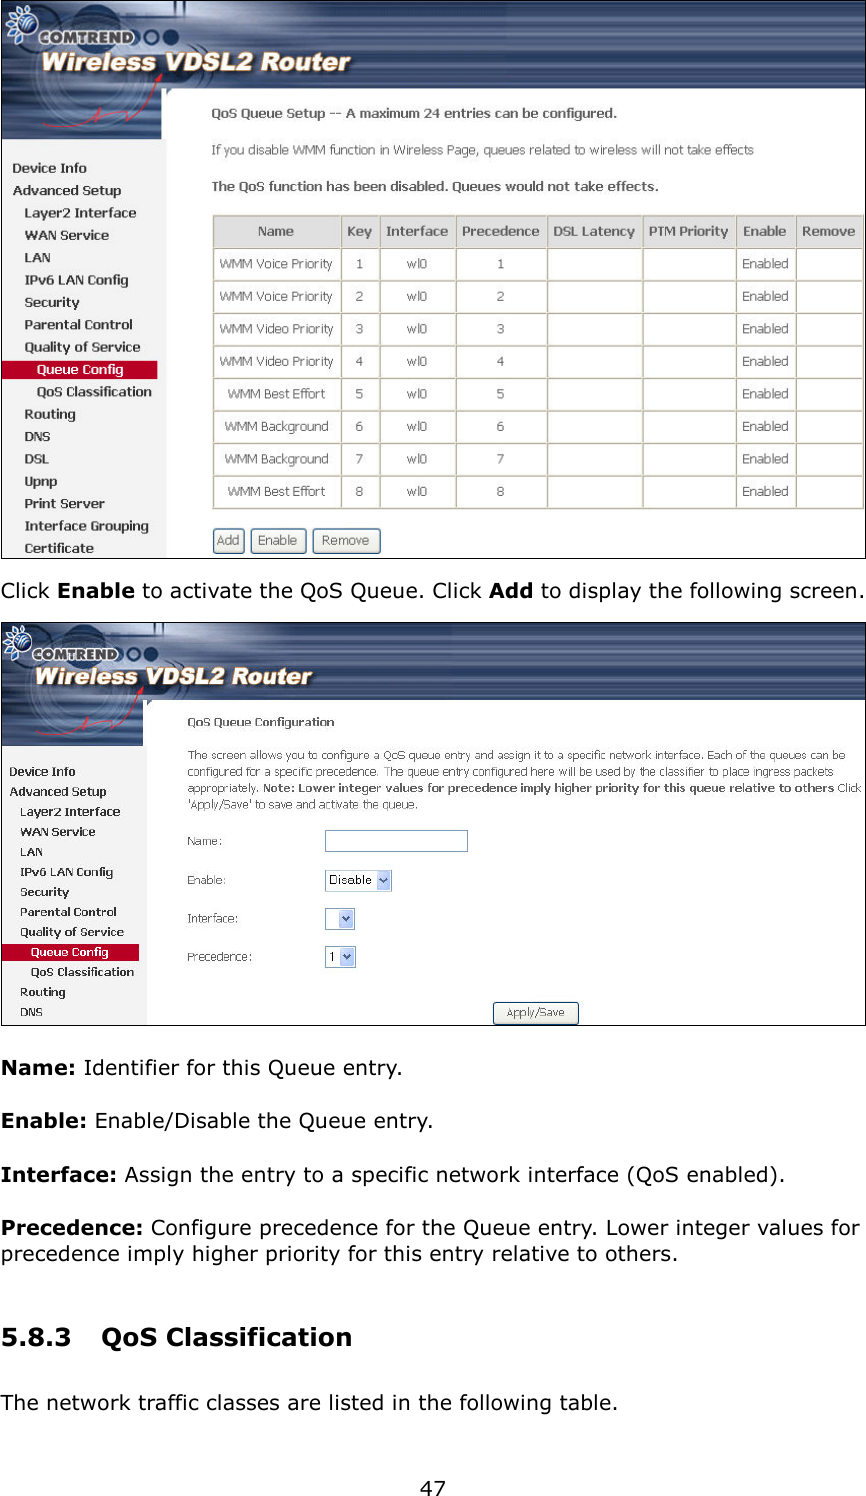   47  Click Enable to activate the QoS Queue. Click Add to display the following screen.  Name: Identifier for this Queue entry. Enable: Enable/Disable the Queue entry. Interface: Assign the entry to a specific network interface (QoS enabled). Precedence: Configure precedence for the Queue entry. Lower integer values for precedence imply higher priority for this entry relative to others. 5.8.3  QoS Classification The network traffic classes are listed in the following table.  